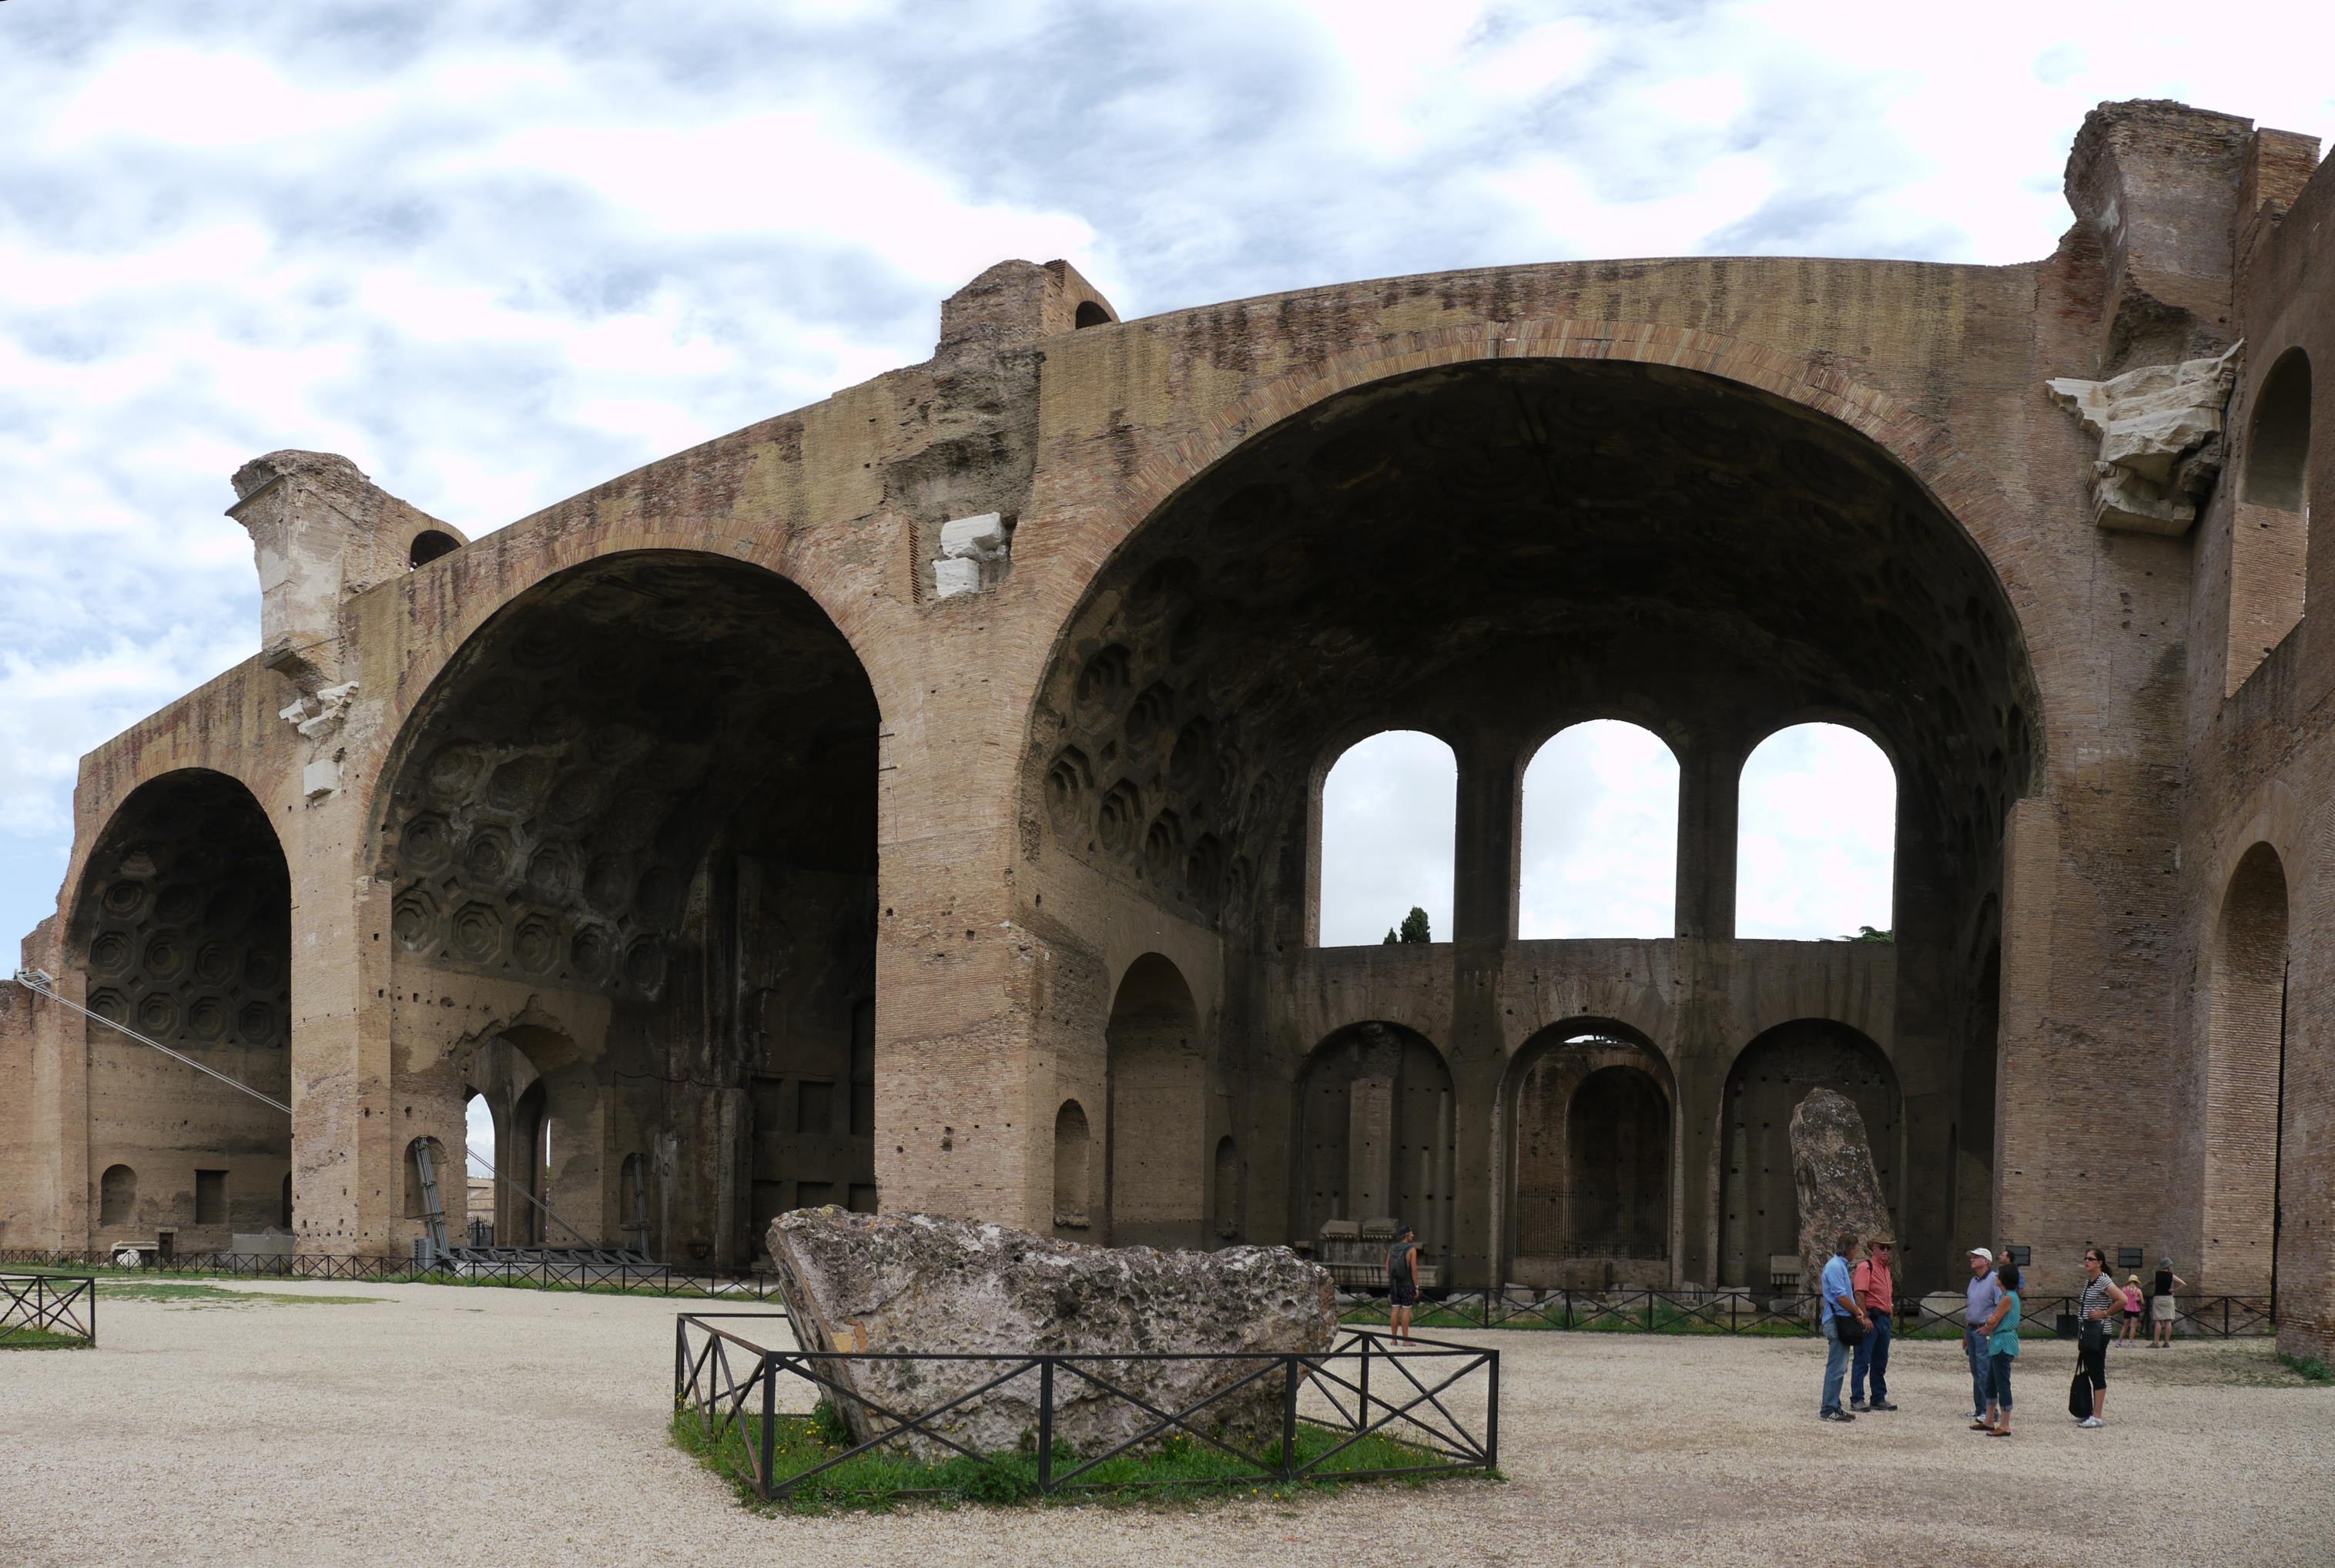 Remaining side aisle only, of the enormous Basilica of Maxentius and Constantine, completed in 312 AD.